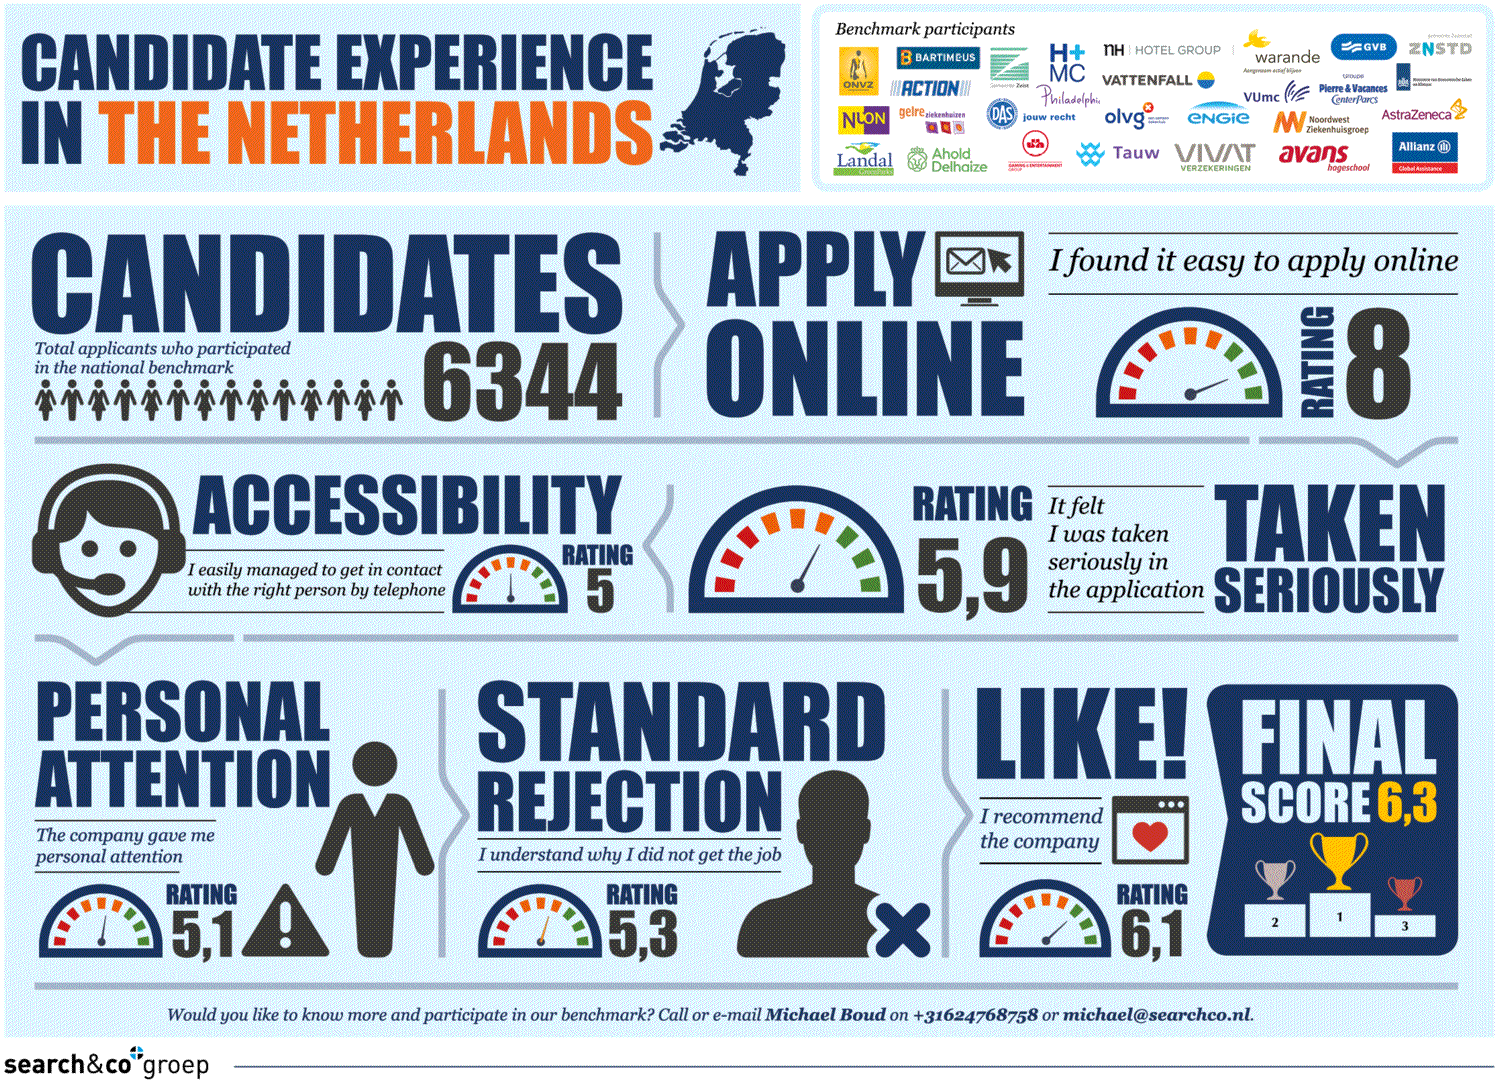 Infographic measure experience